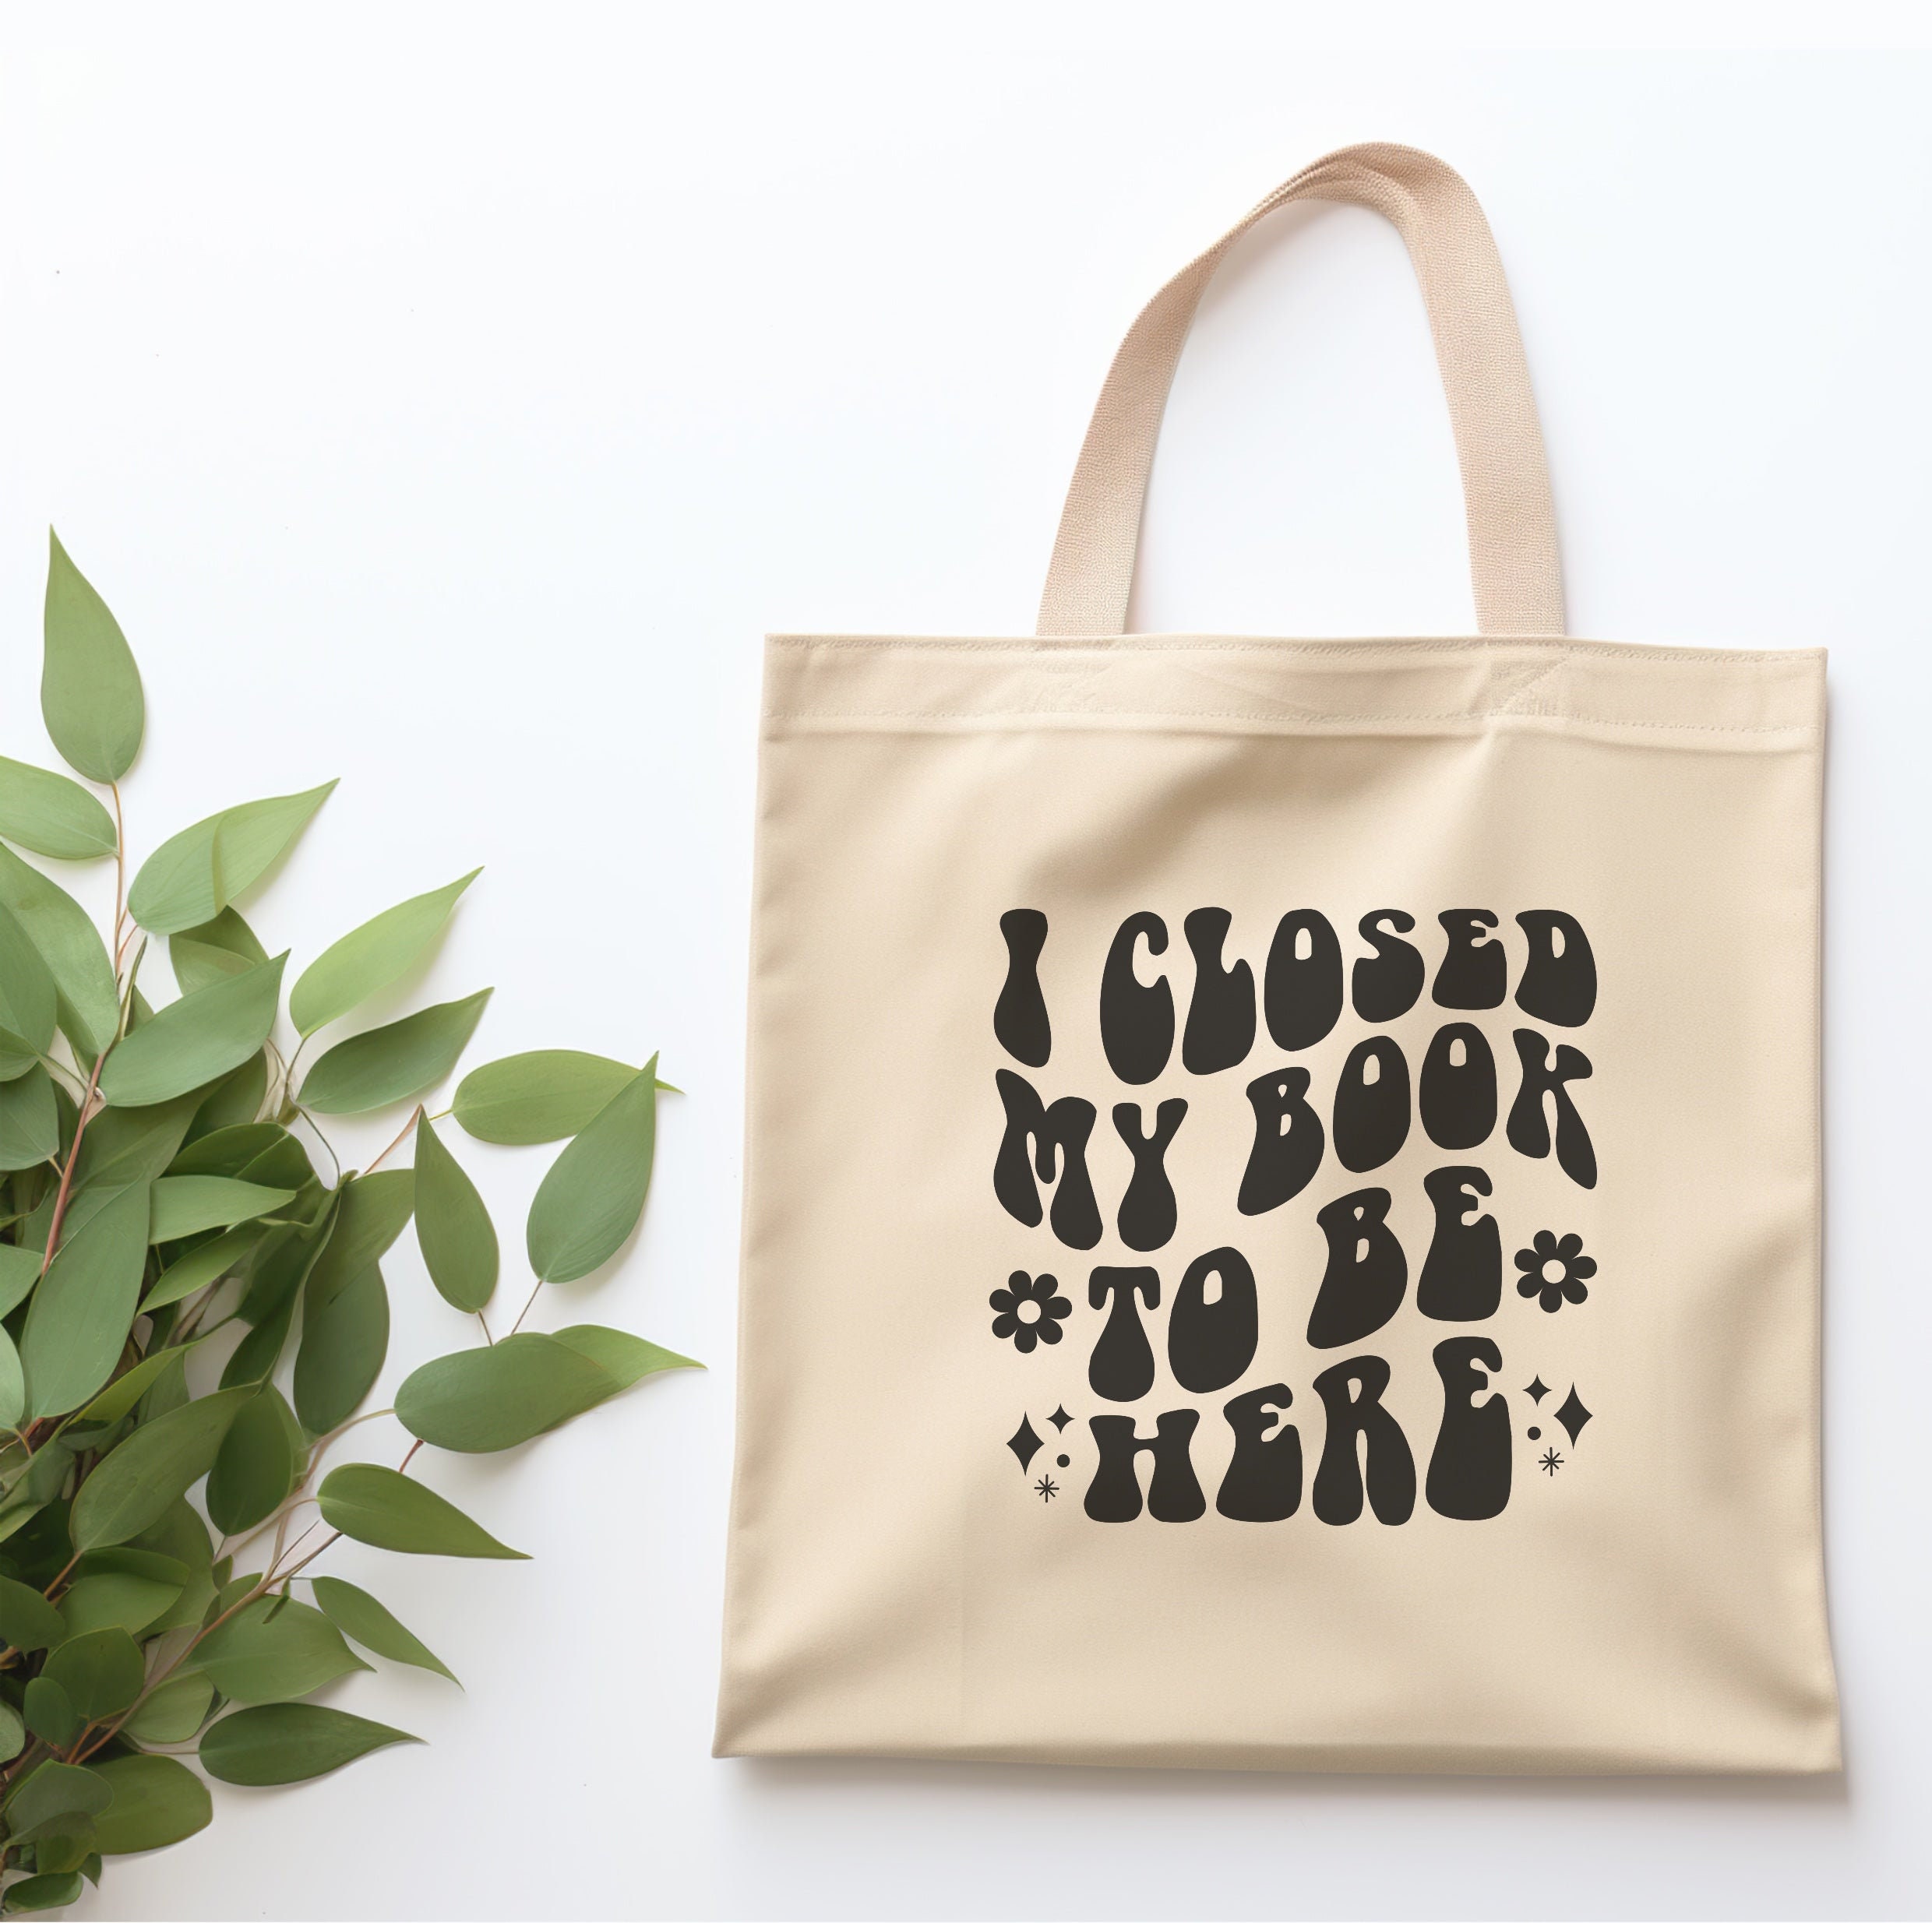 I'd Rather Be Knitting Tote Bag